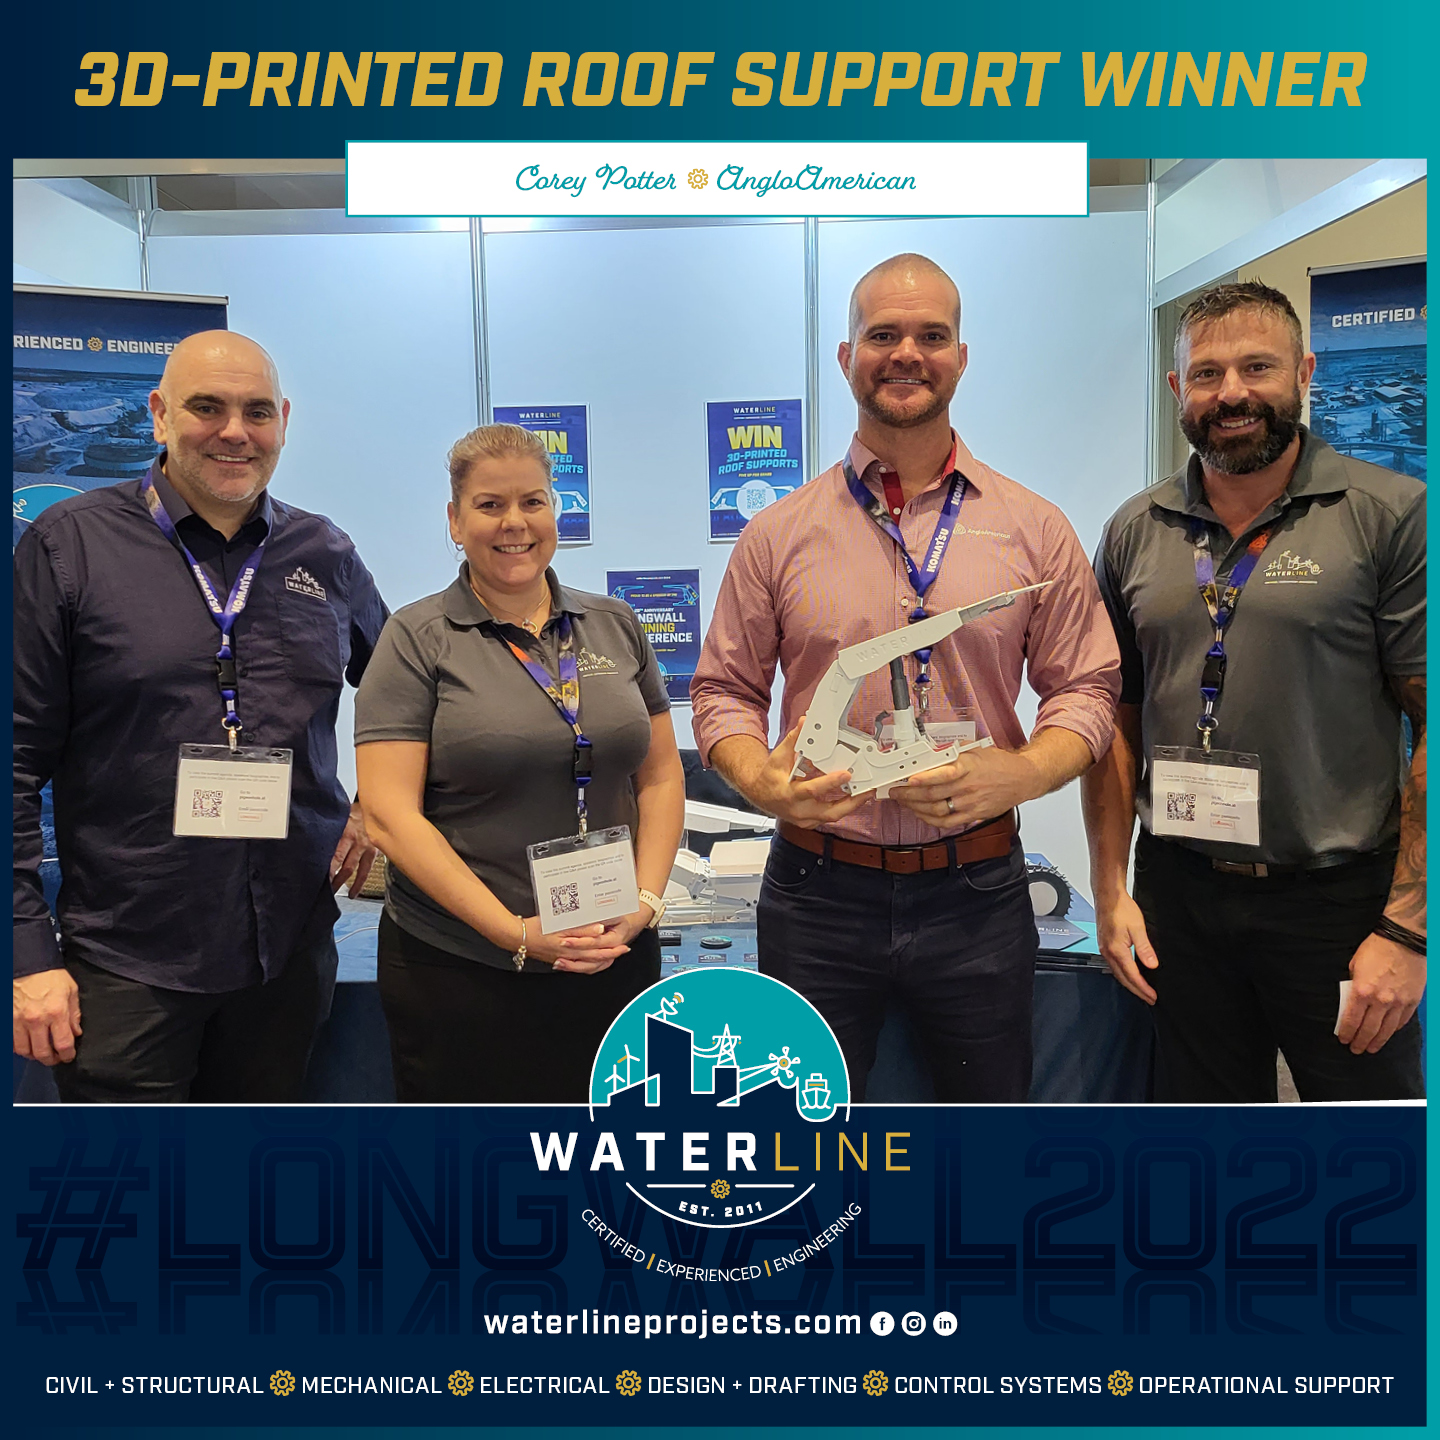 Myself (Dan Harrison), Kylie Davey, Corey Potter from Anglo American, winner of one of our 3D-printed roof supports, and Chris Mapleson